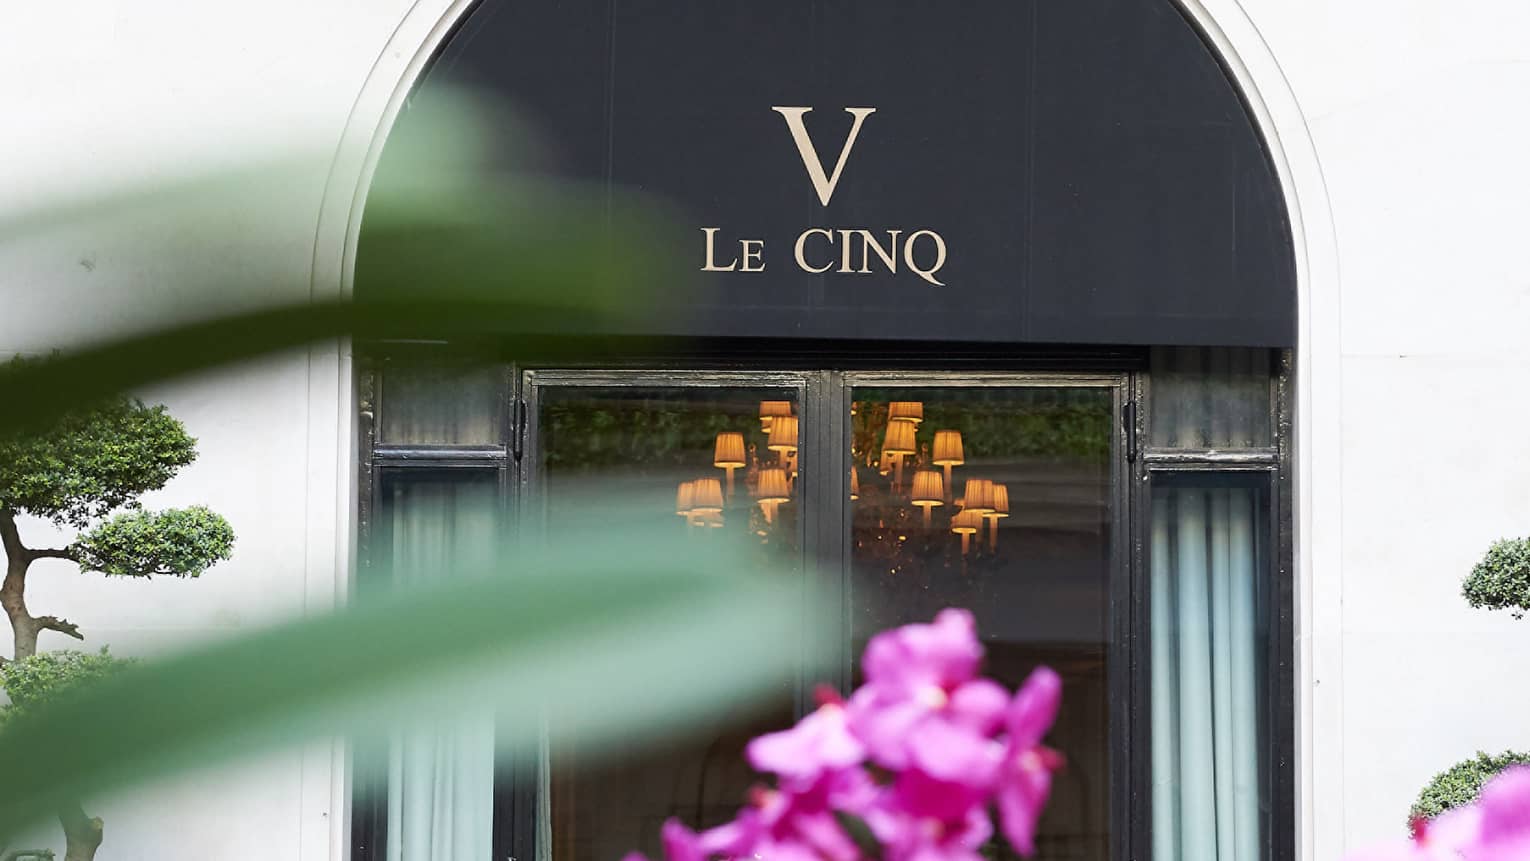 Le Cinq awning over entrance past purple flowers